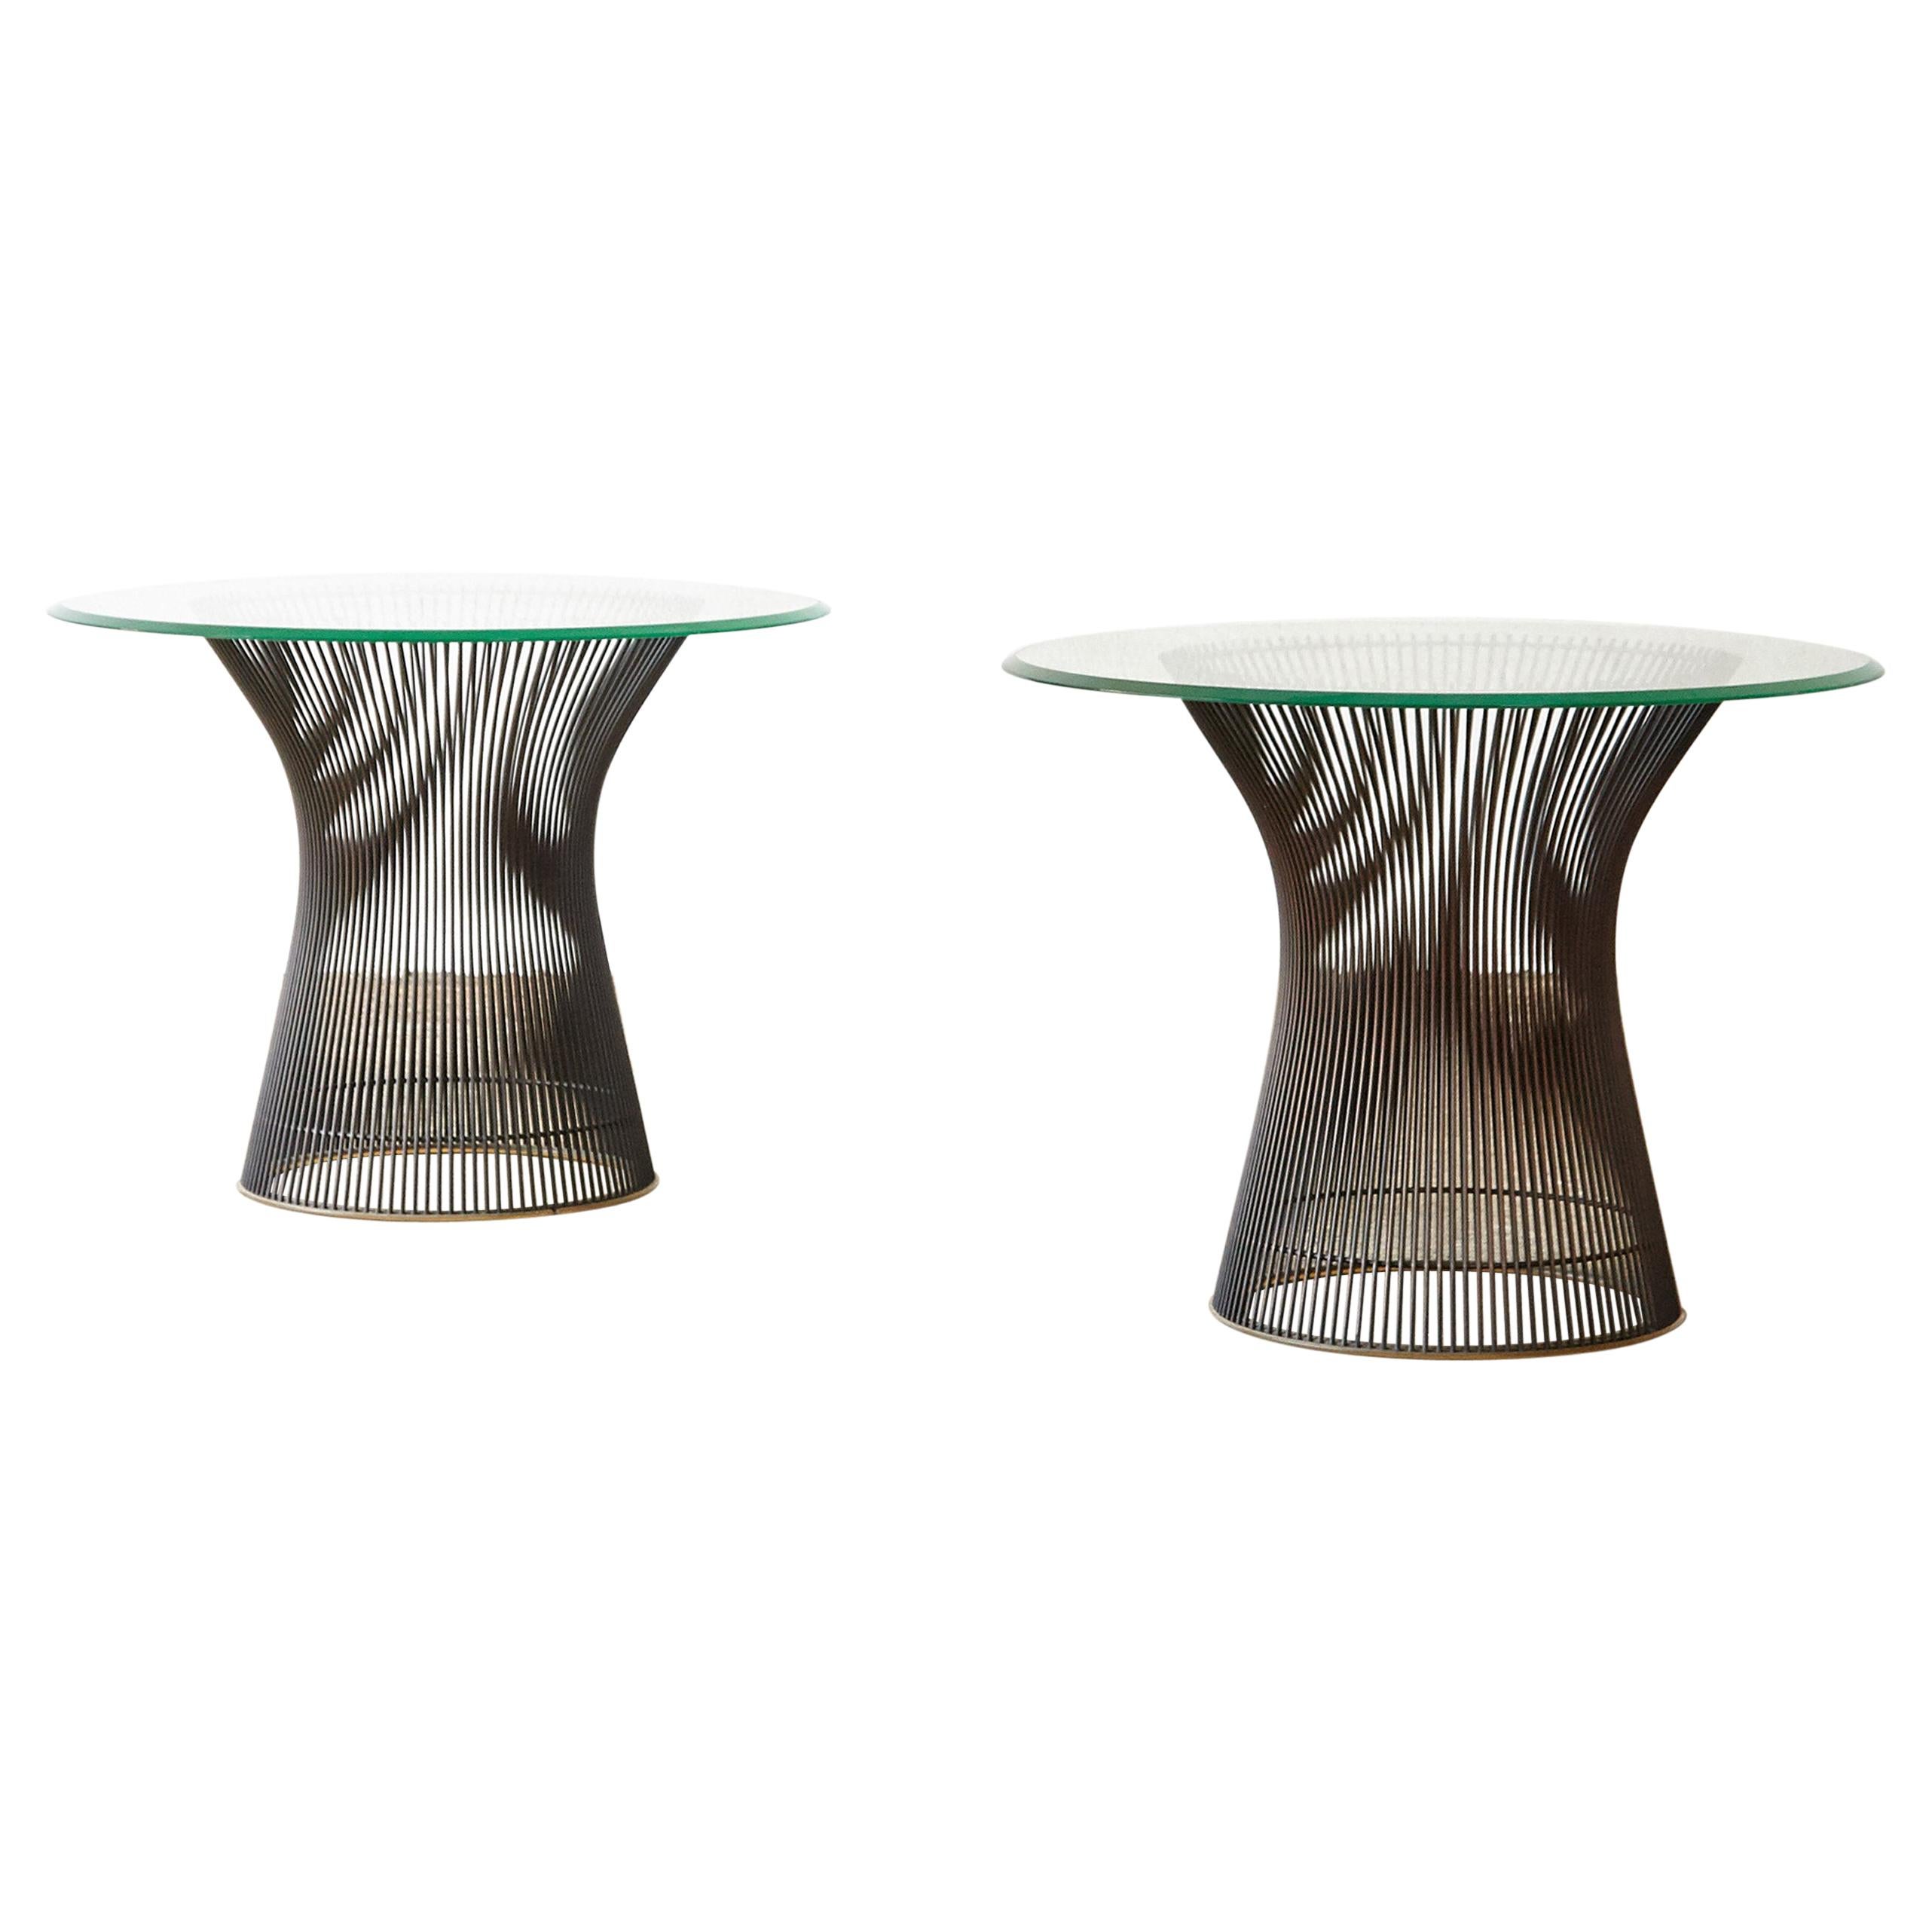 Pair of Warren Platner for Knoll Side Tables, USA